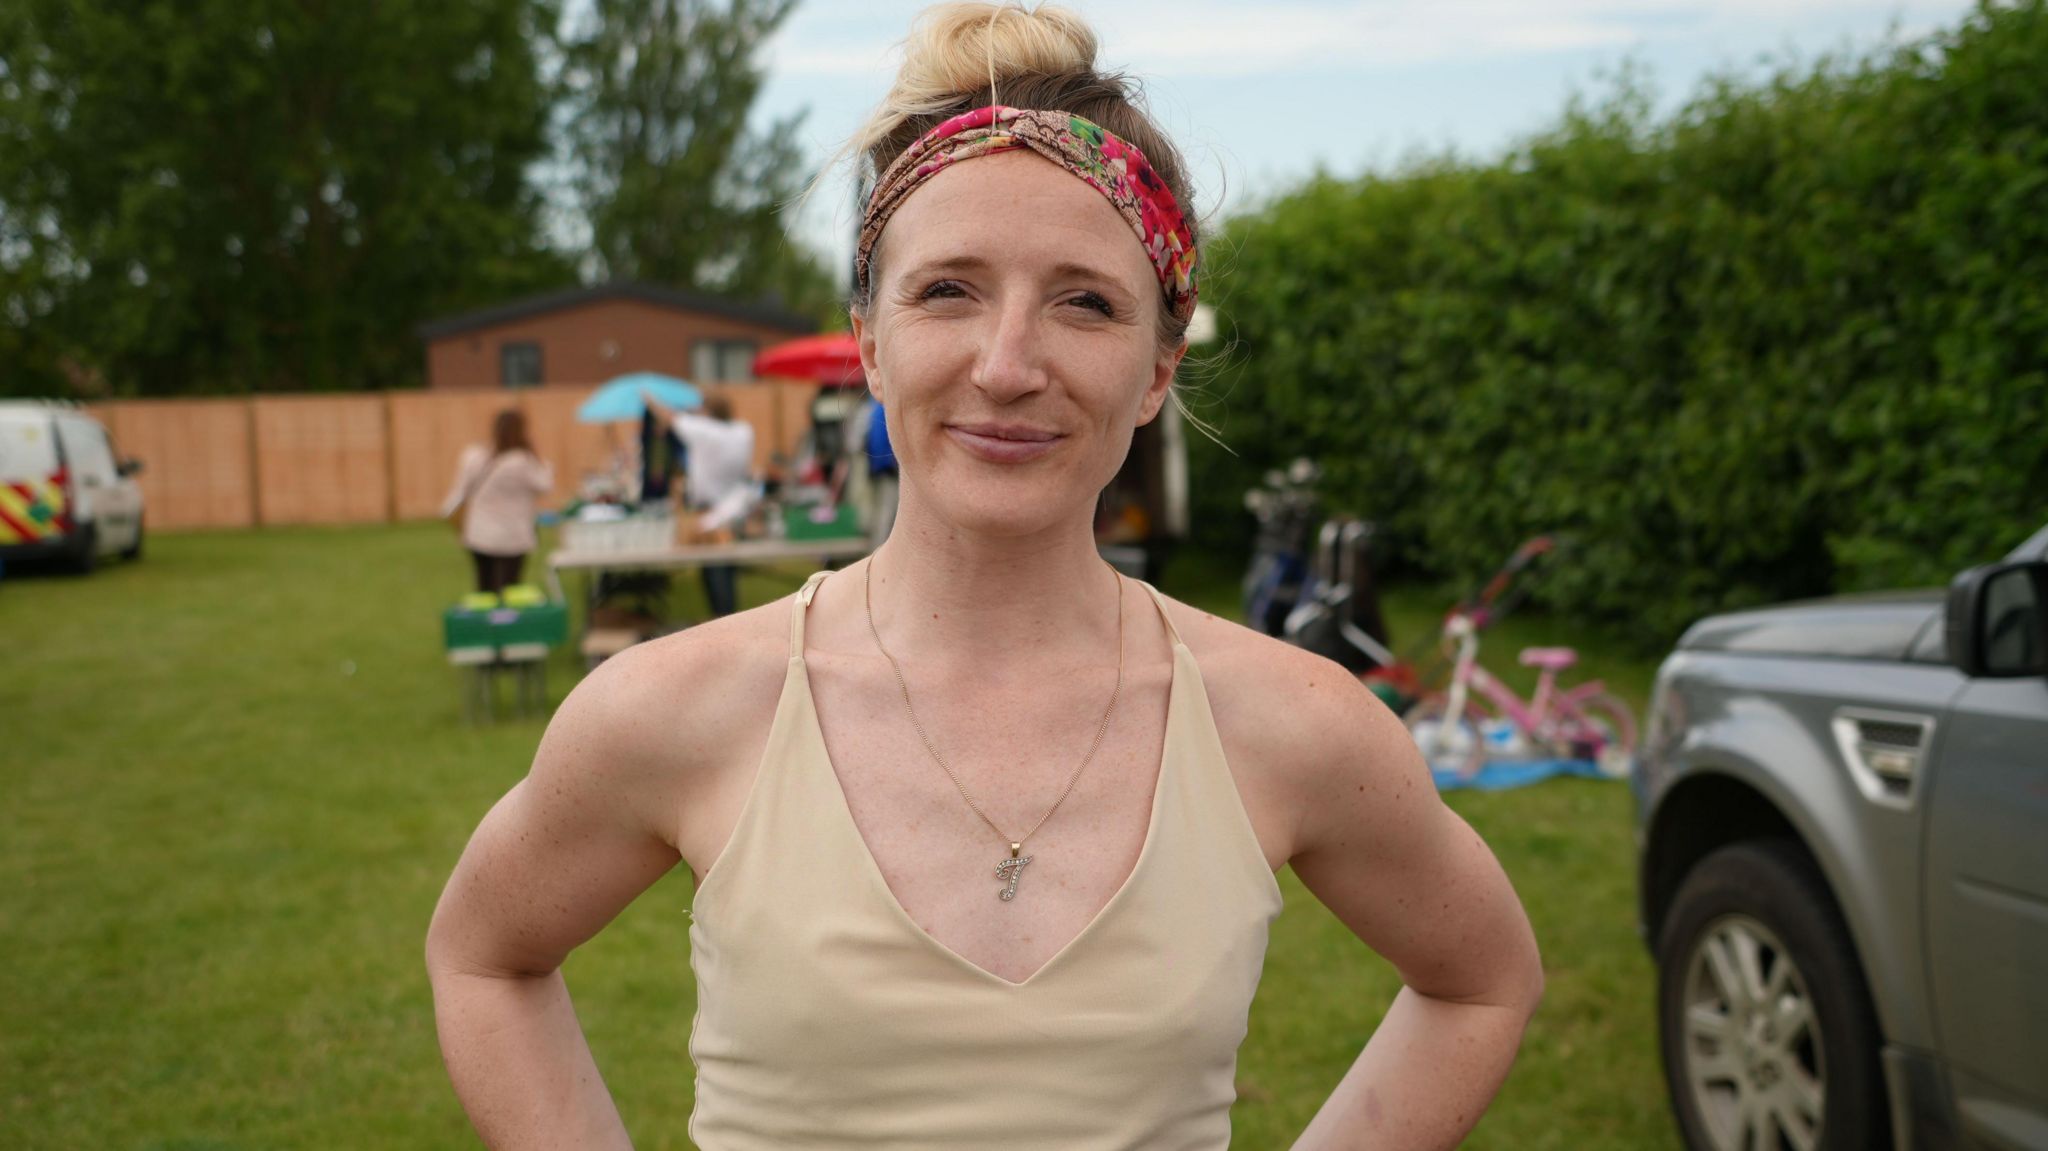 A woman with a cream top and colourful hairband - standing outside at a car boot sale